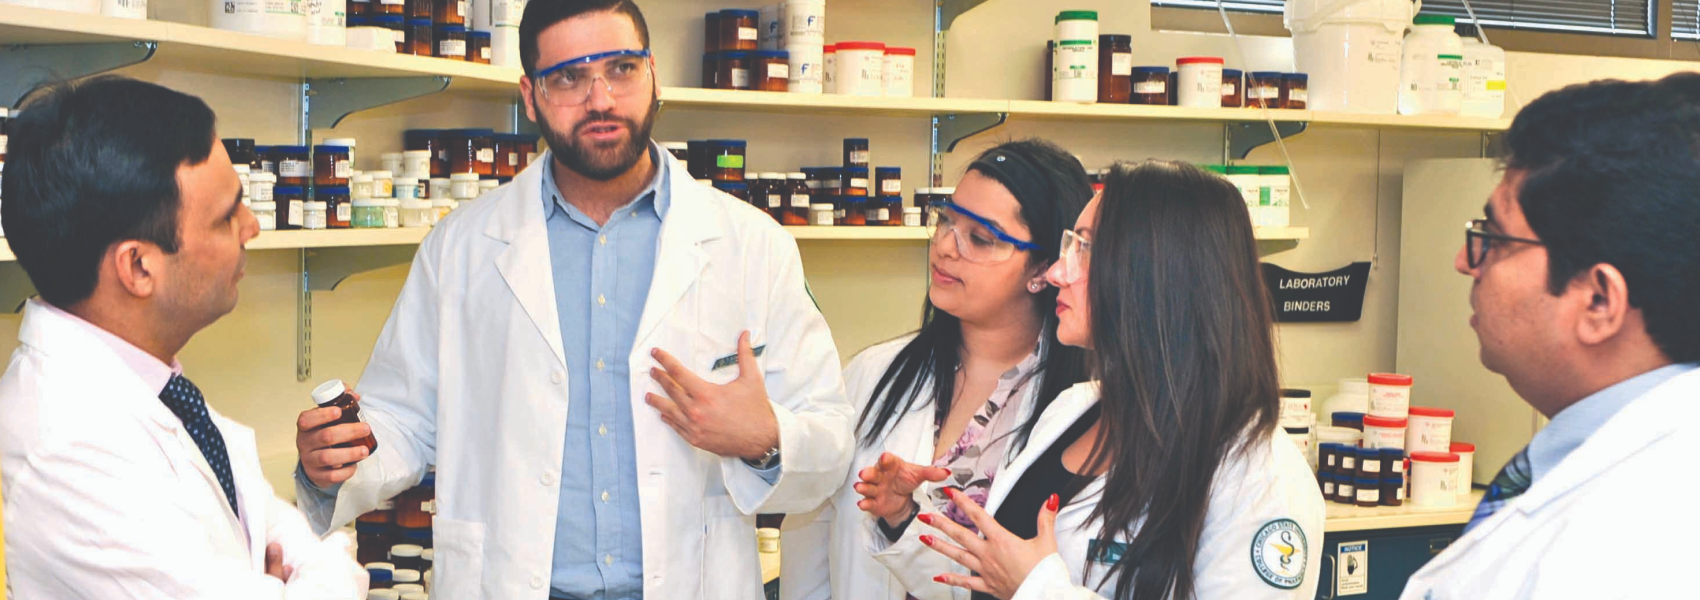 grad students having a discussion in a lab